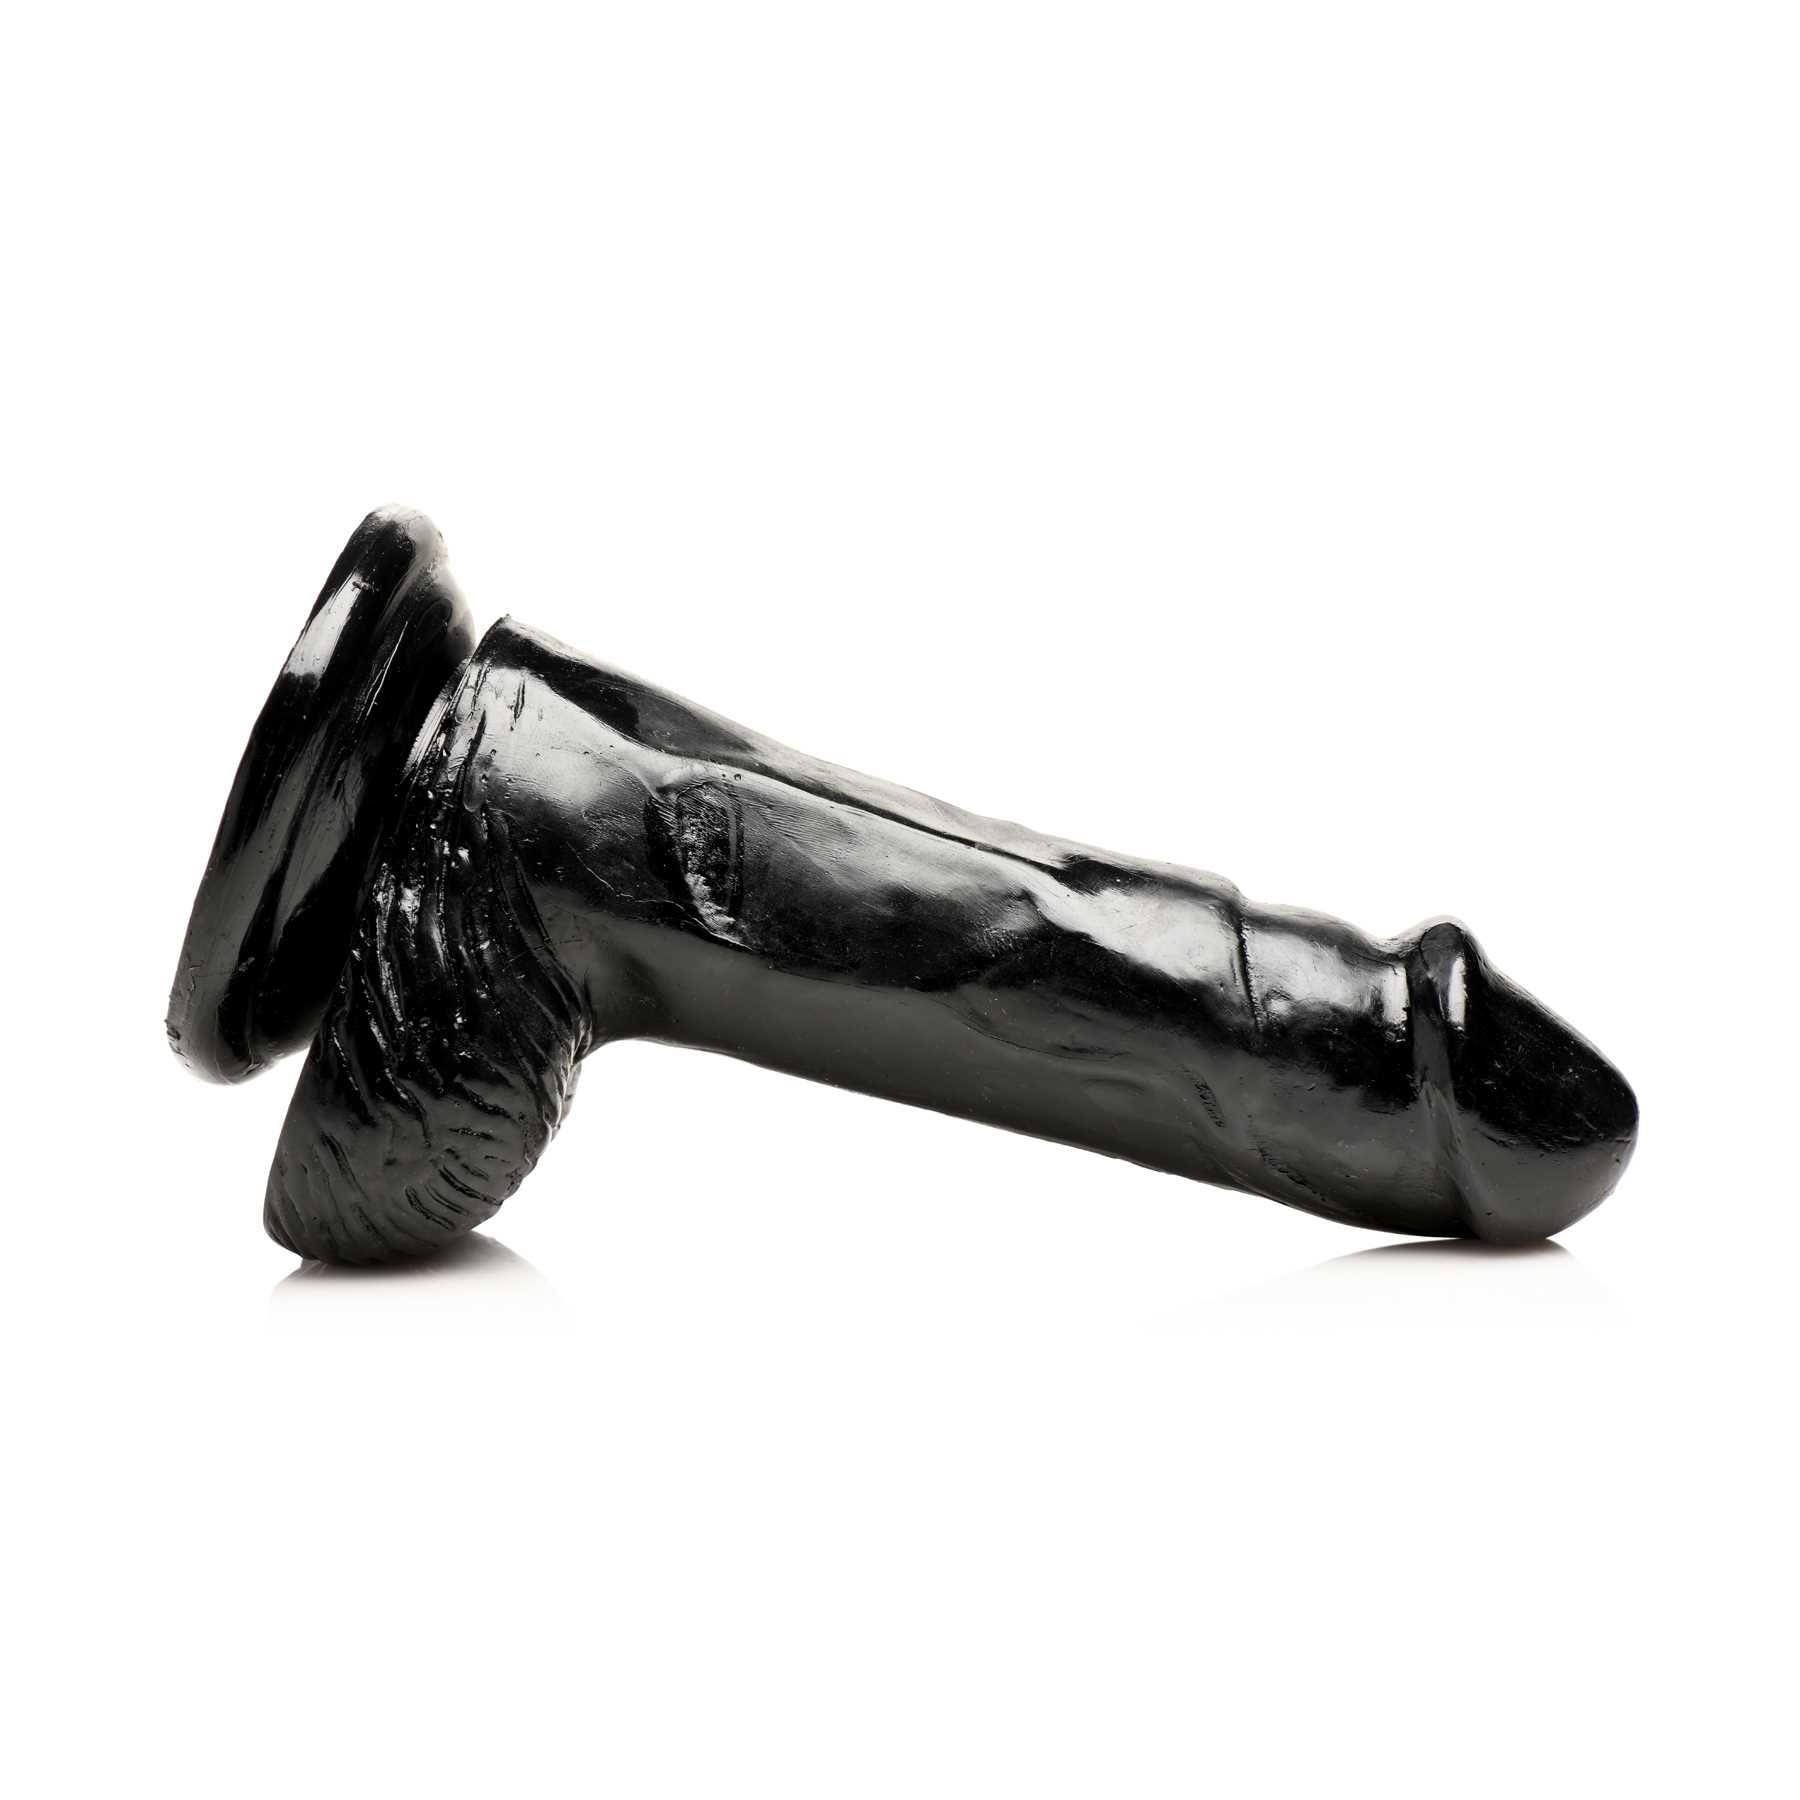 Mister Perfect - 5 inch Dildo With Balls